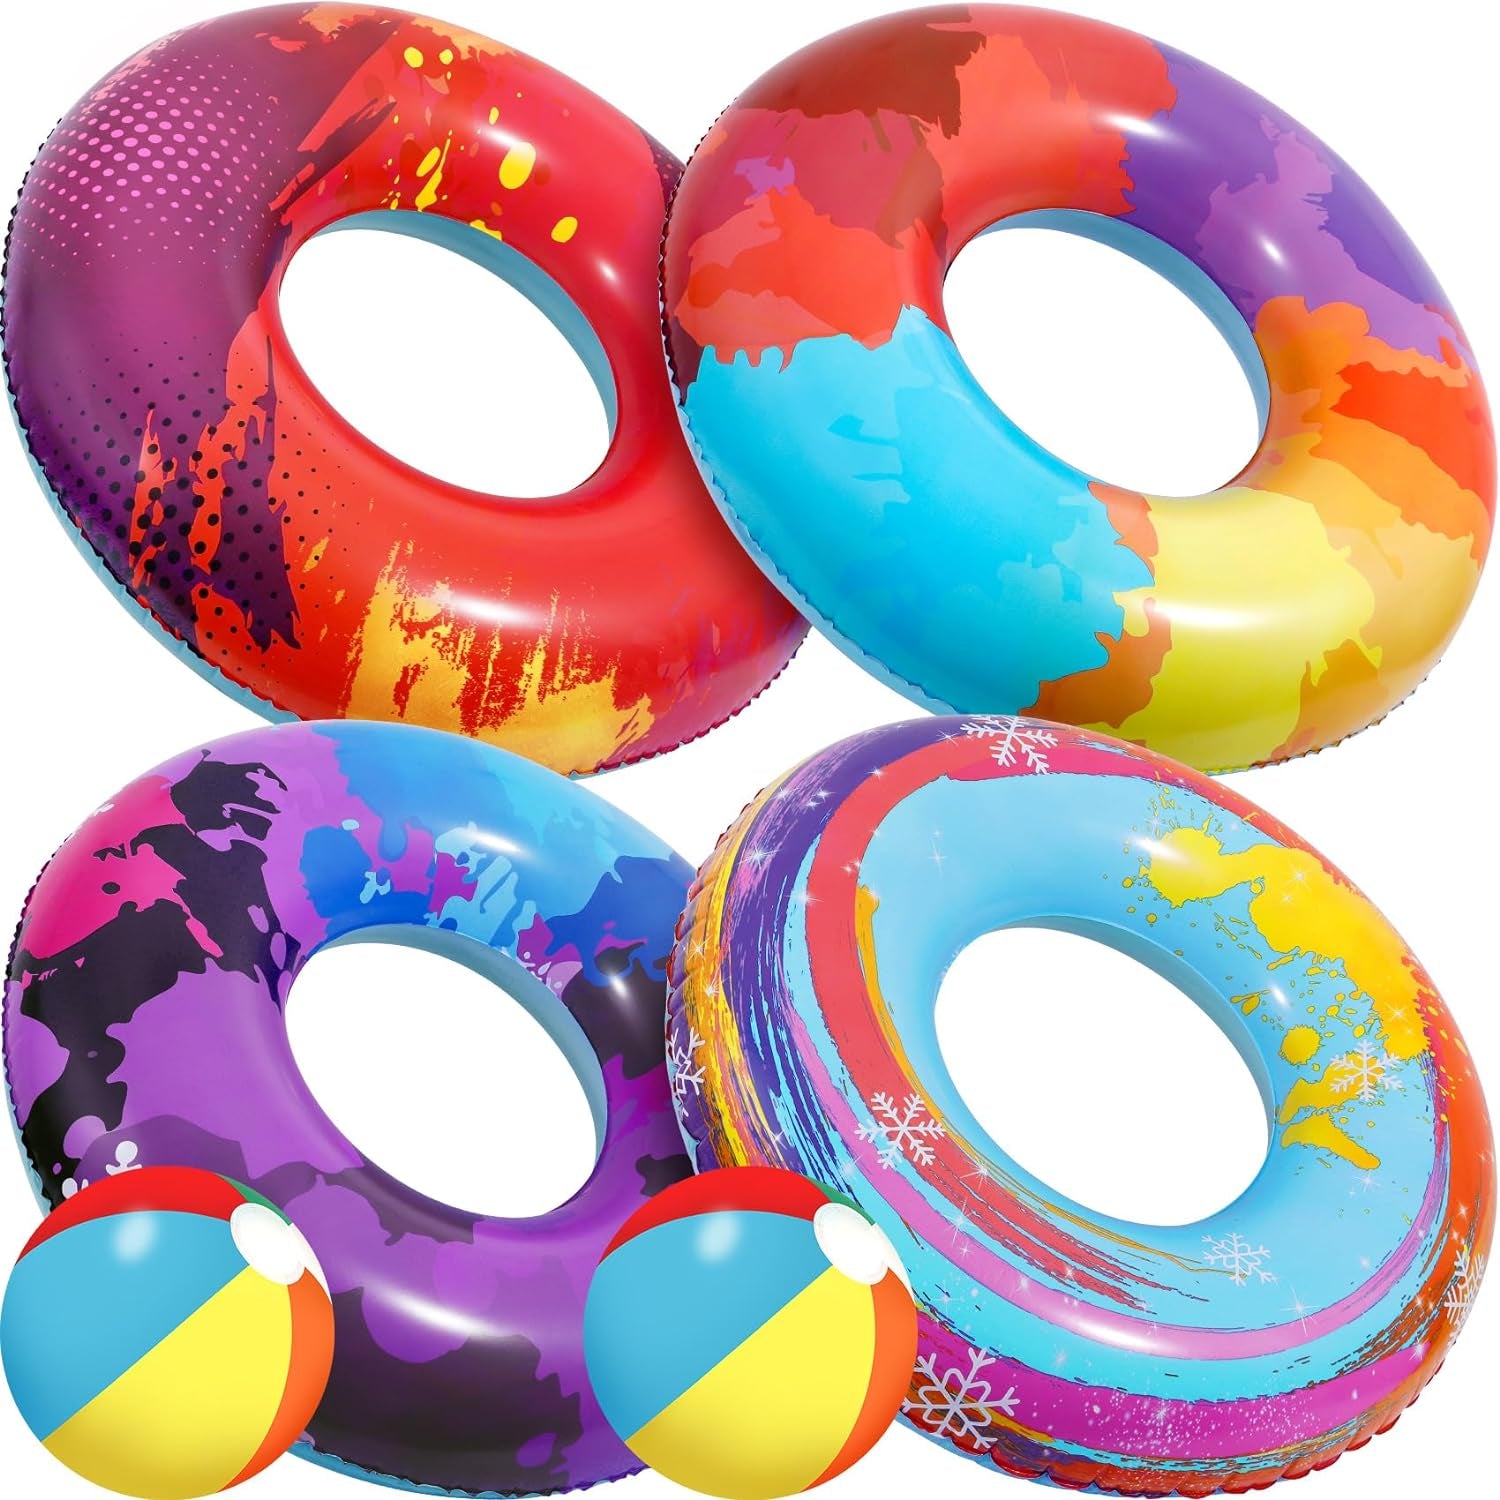 6Pcs Pool Floats Tubes, Colorful Inflatable Pool Floats Kids, Pool Floaties Beach Swimming Rings Party Toys for Kids and Adults